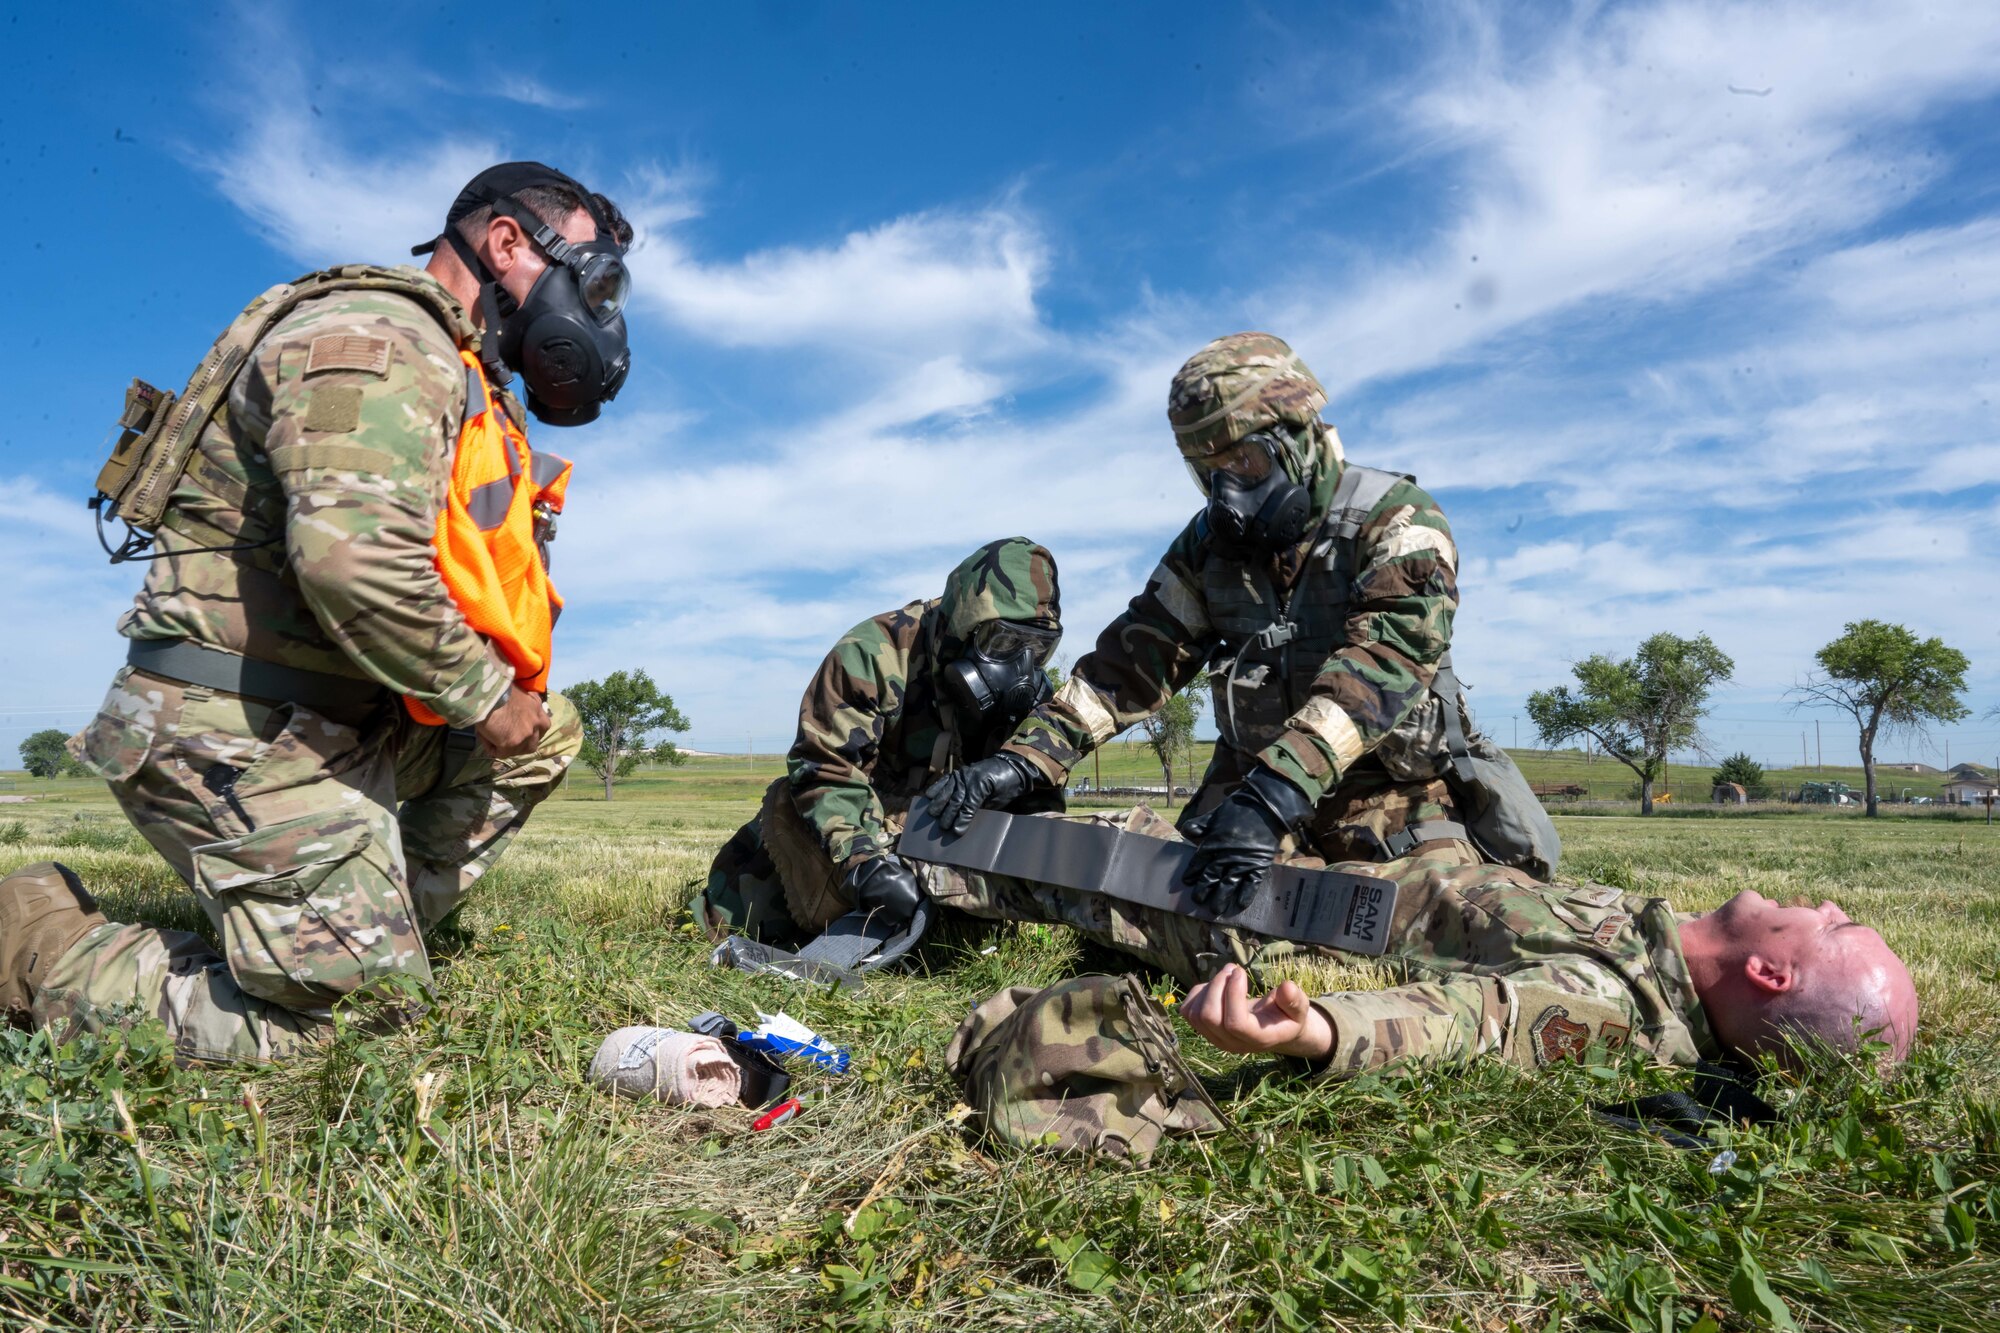 Airmen with the 28th Civil Engineering Squadron perform Tactical Combat Casualty Care (TCCC) on an airman simulating an injury during an exercise on Ellsworth Air Force Base, South Dakota, July 26, 2023. The exercise used real actors as casualties to add a sense of realism. (U.S. Air Force Photo by Specialist 3 Adam Olson)